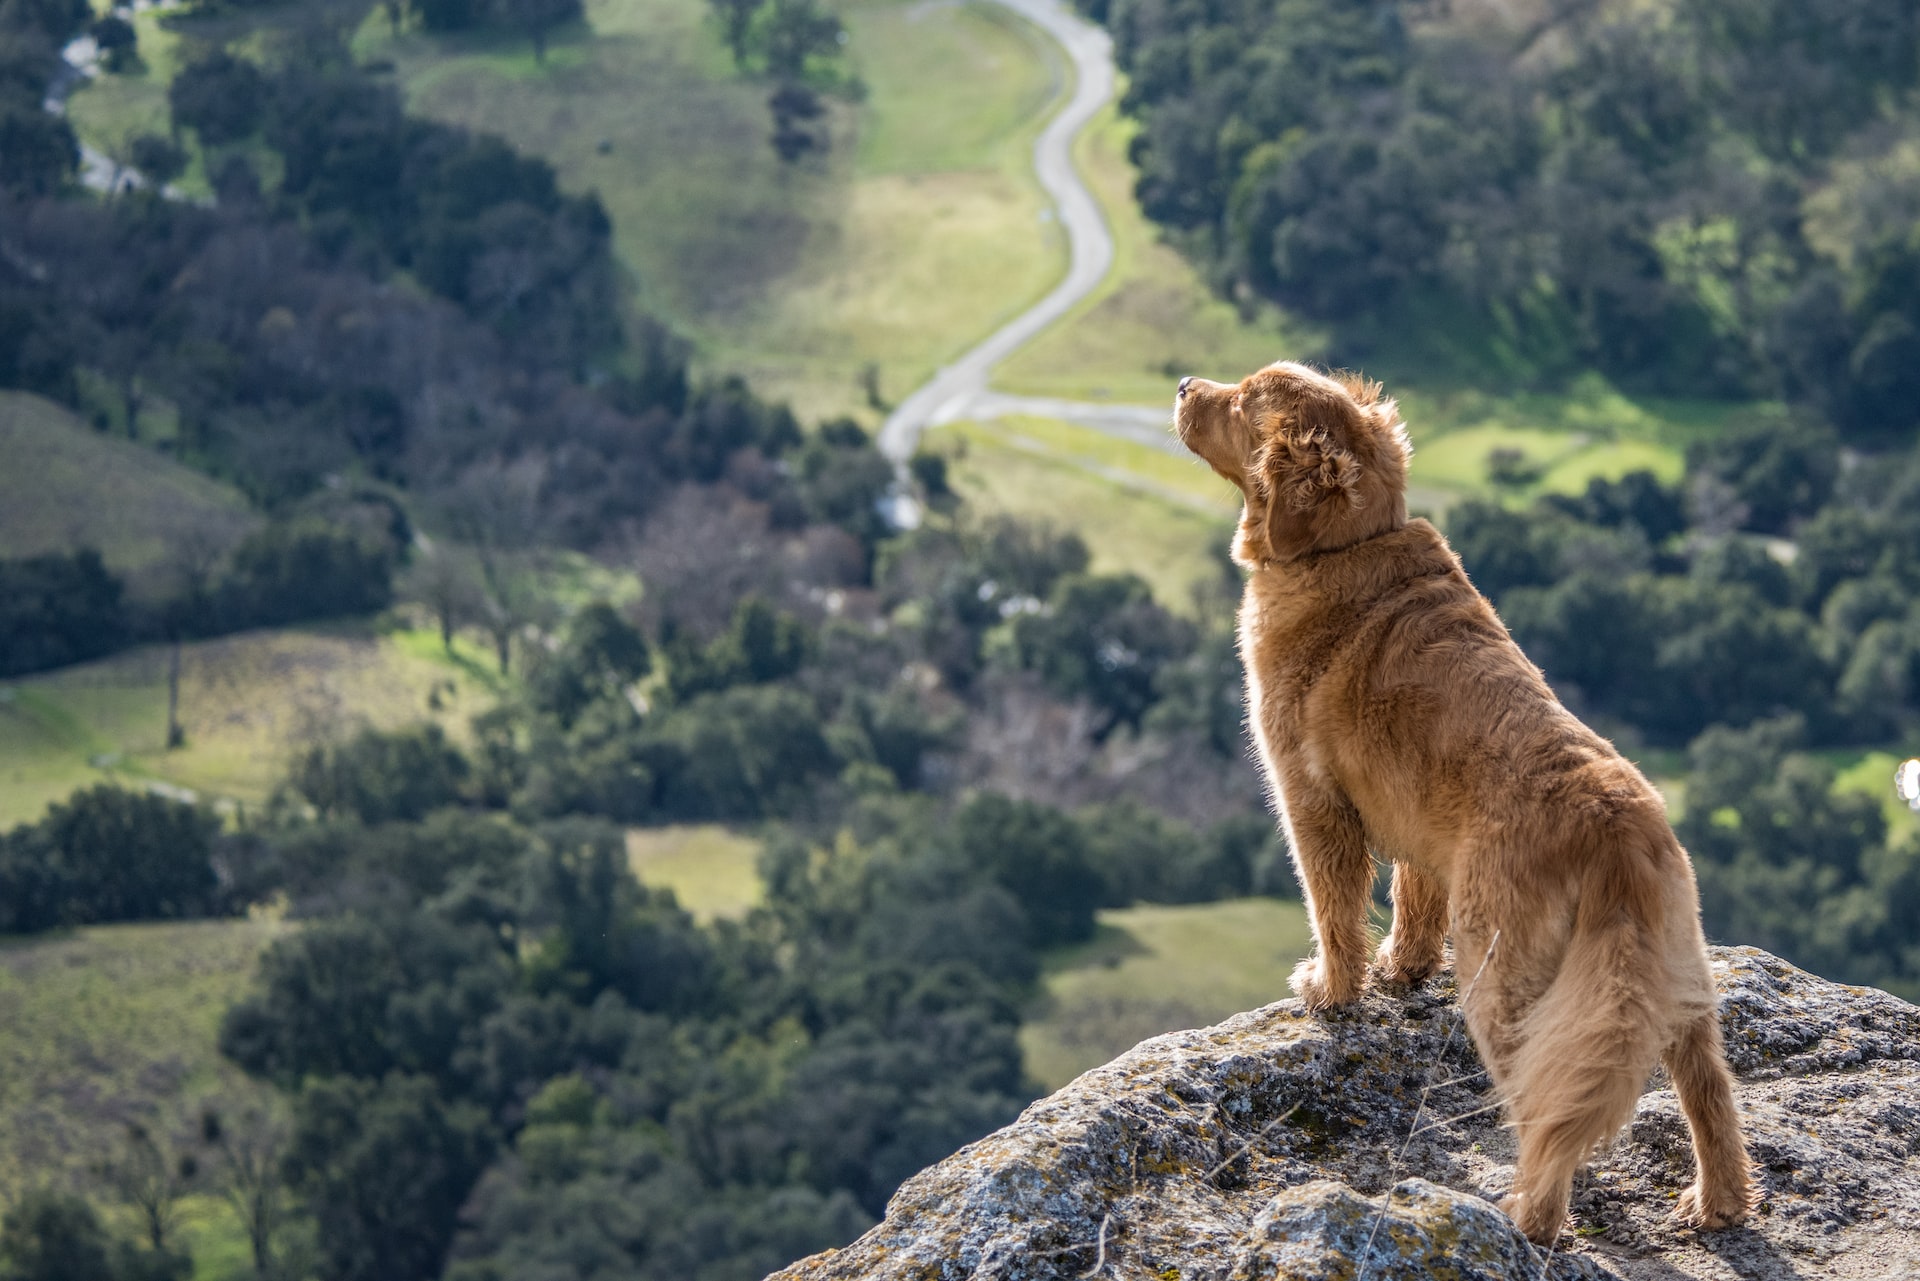 A golden retriever standing on a mountain ledge looking at the forest below